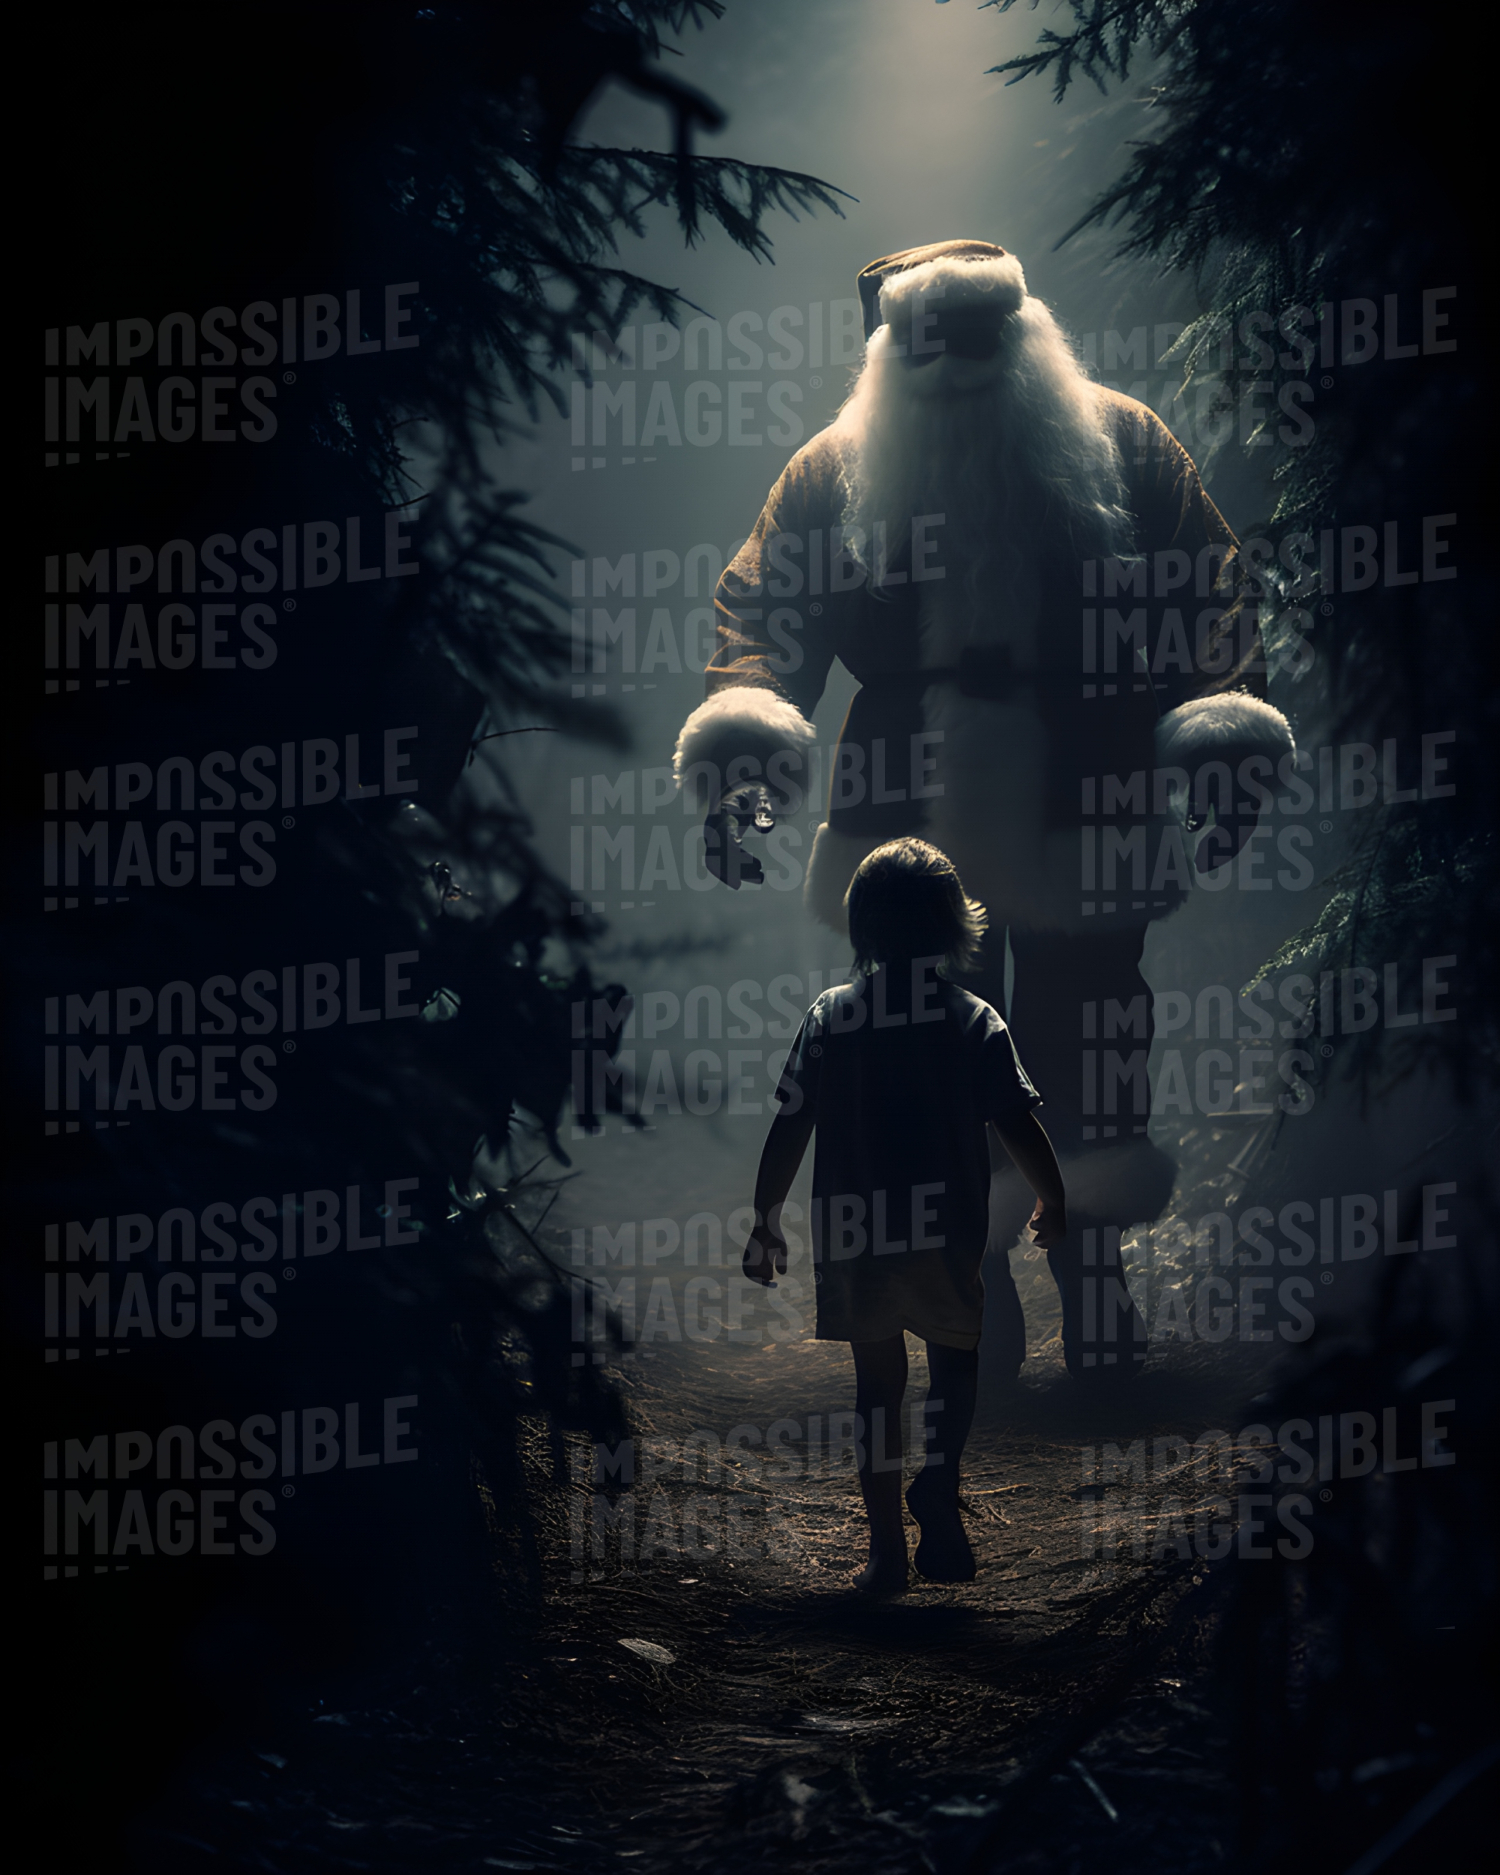 A young boy being stalked by santa in the woods -  A Young Boy is Terrorized by Santa Claus in a Dark and Spooky Forest.